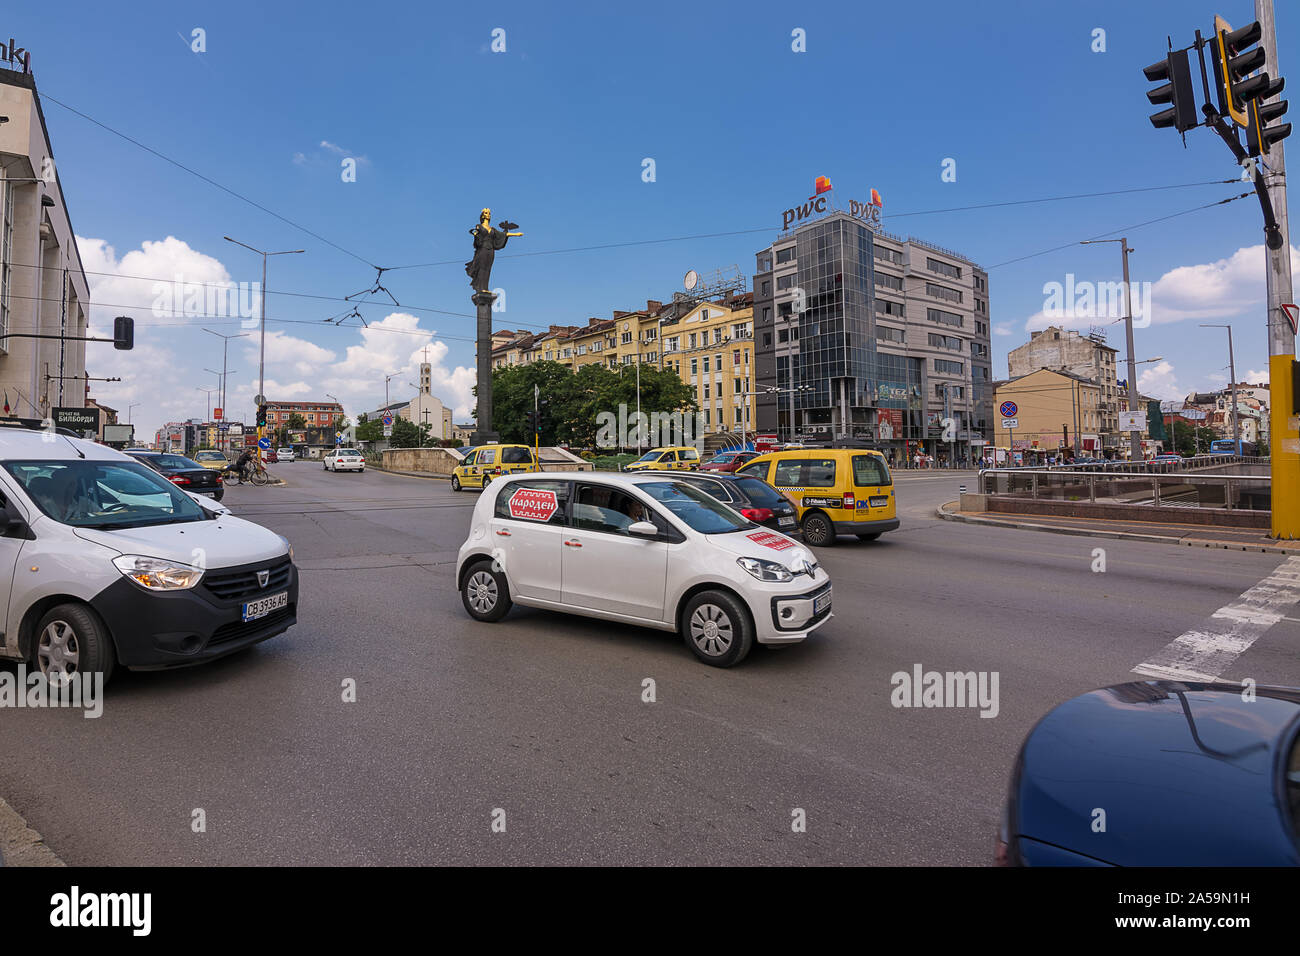 Sofia, Bulgaria - June 25, 2019: Road junction and traffic in the center of Sofia with the Statue of Saint Sophia, symbol of wisdom and protector of S Stock Photo